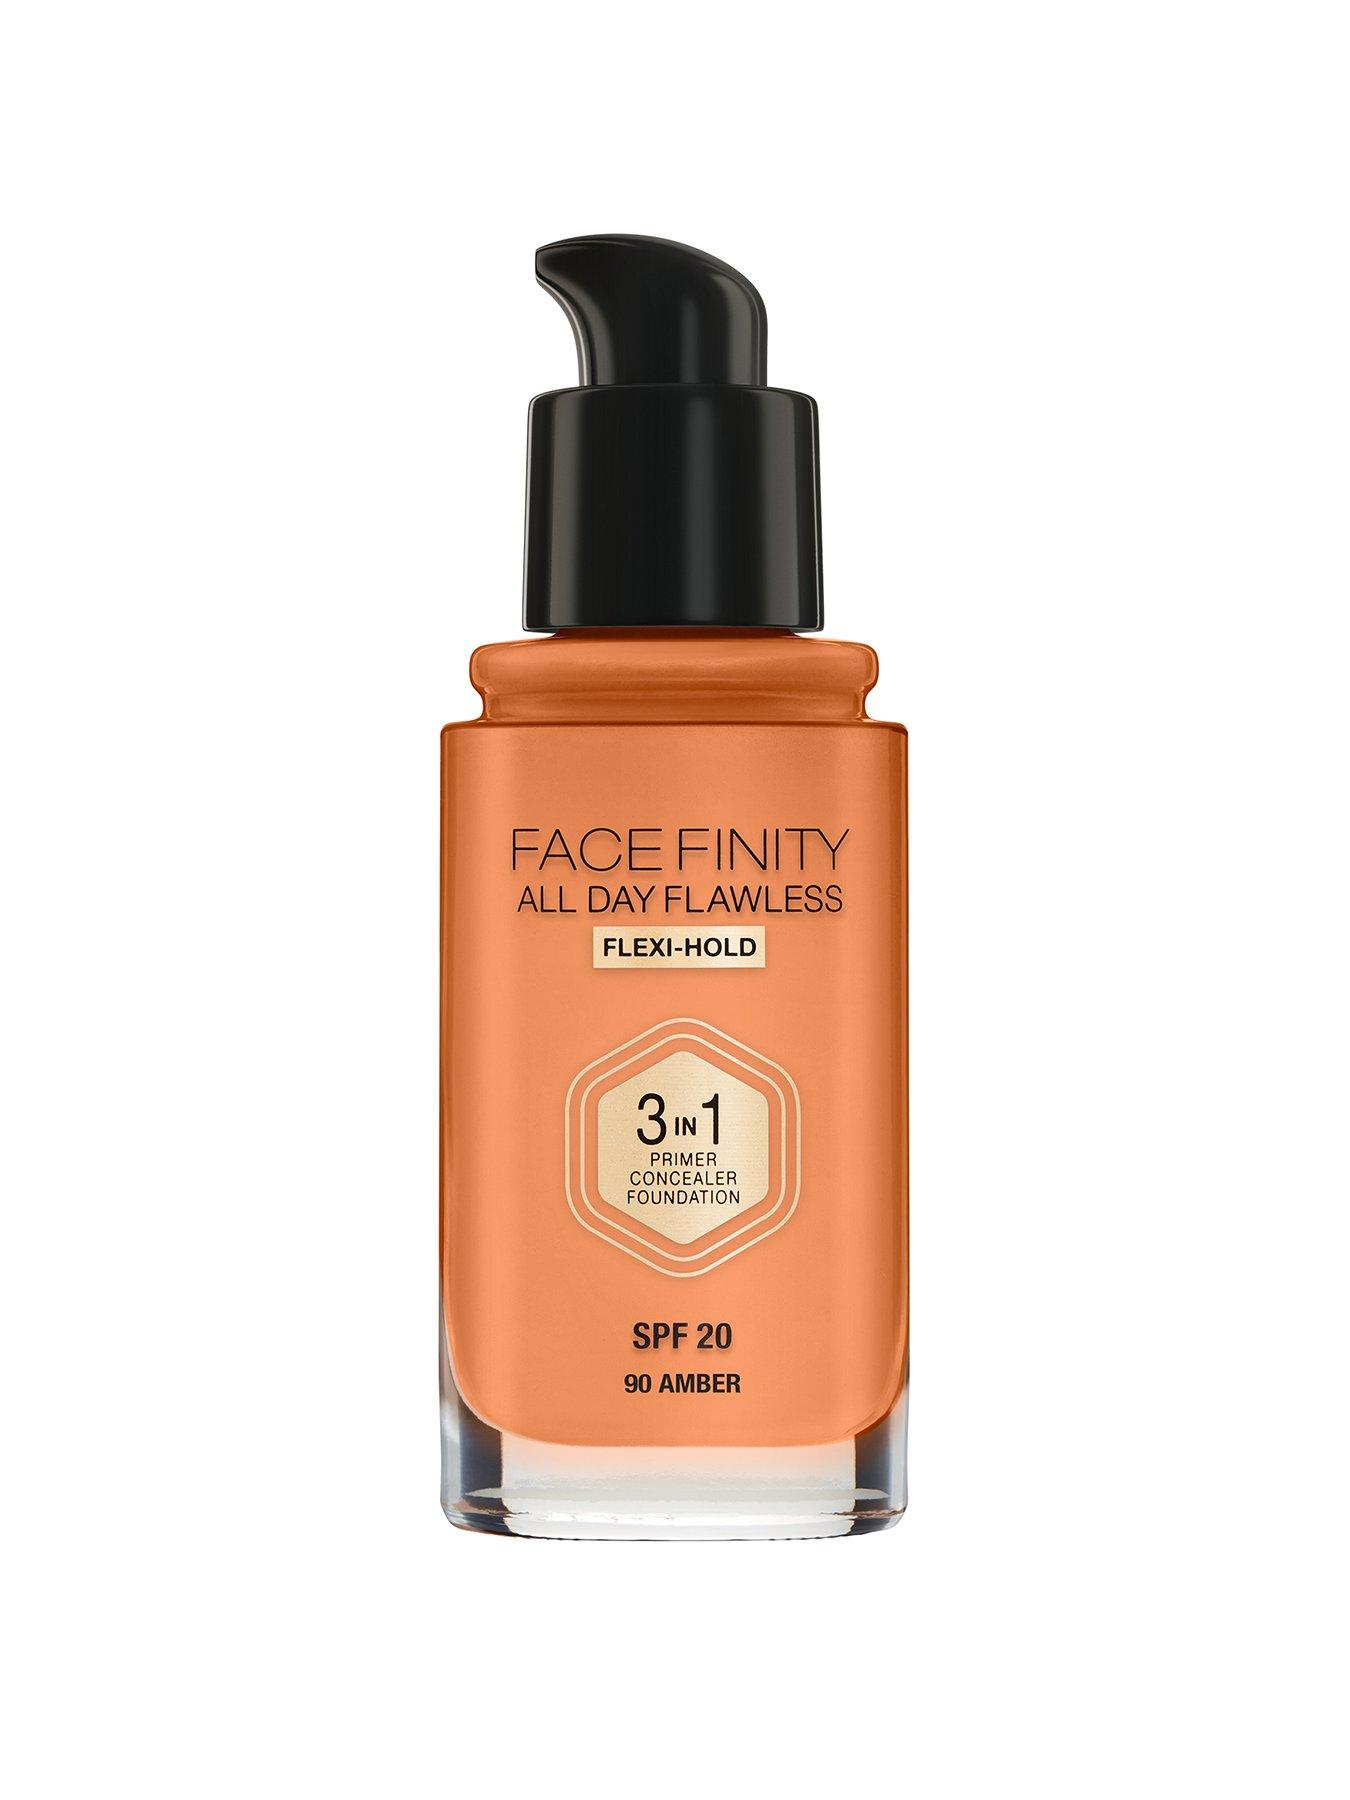 Flawless Max Factor Foundation Day All Facefinity